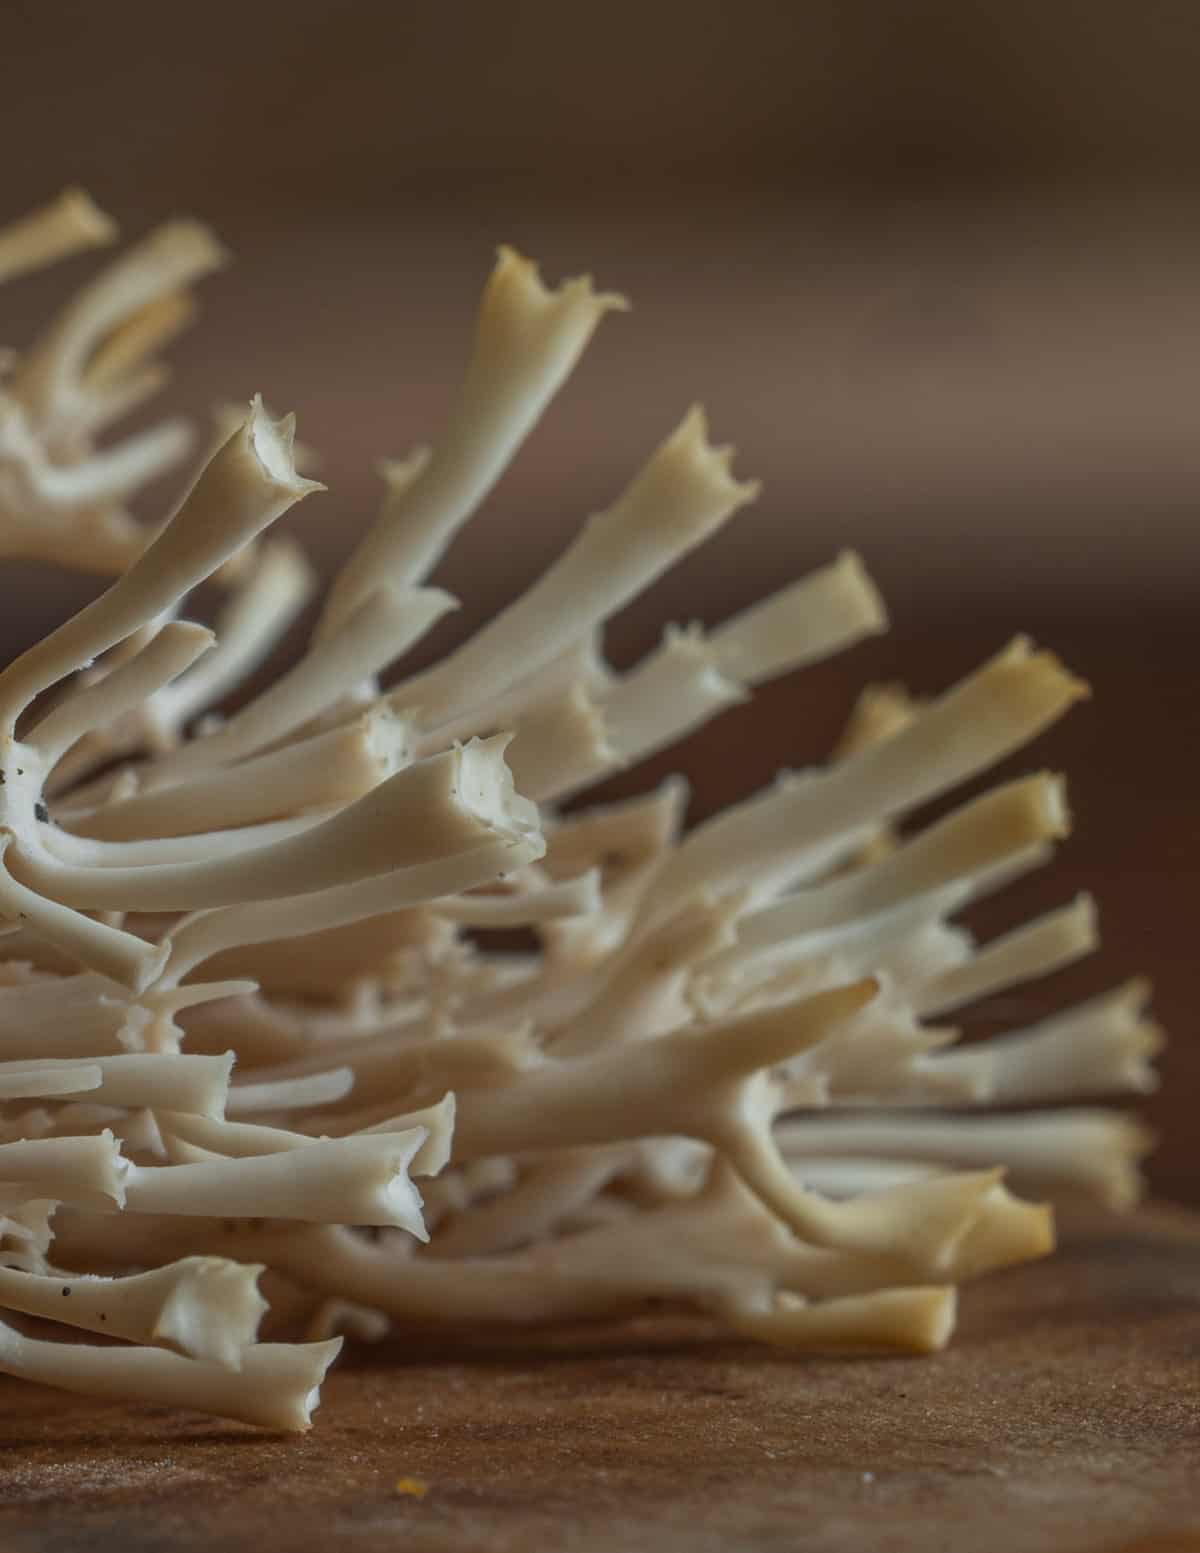 Close up image showing the crown on the branching tips of crown coral mushrooms. 